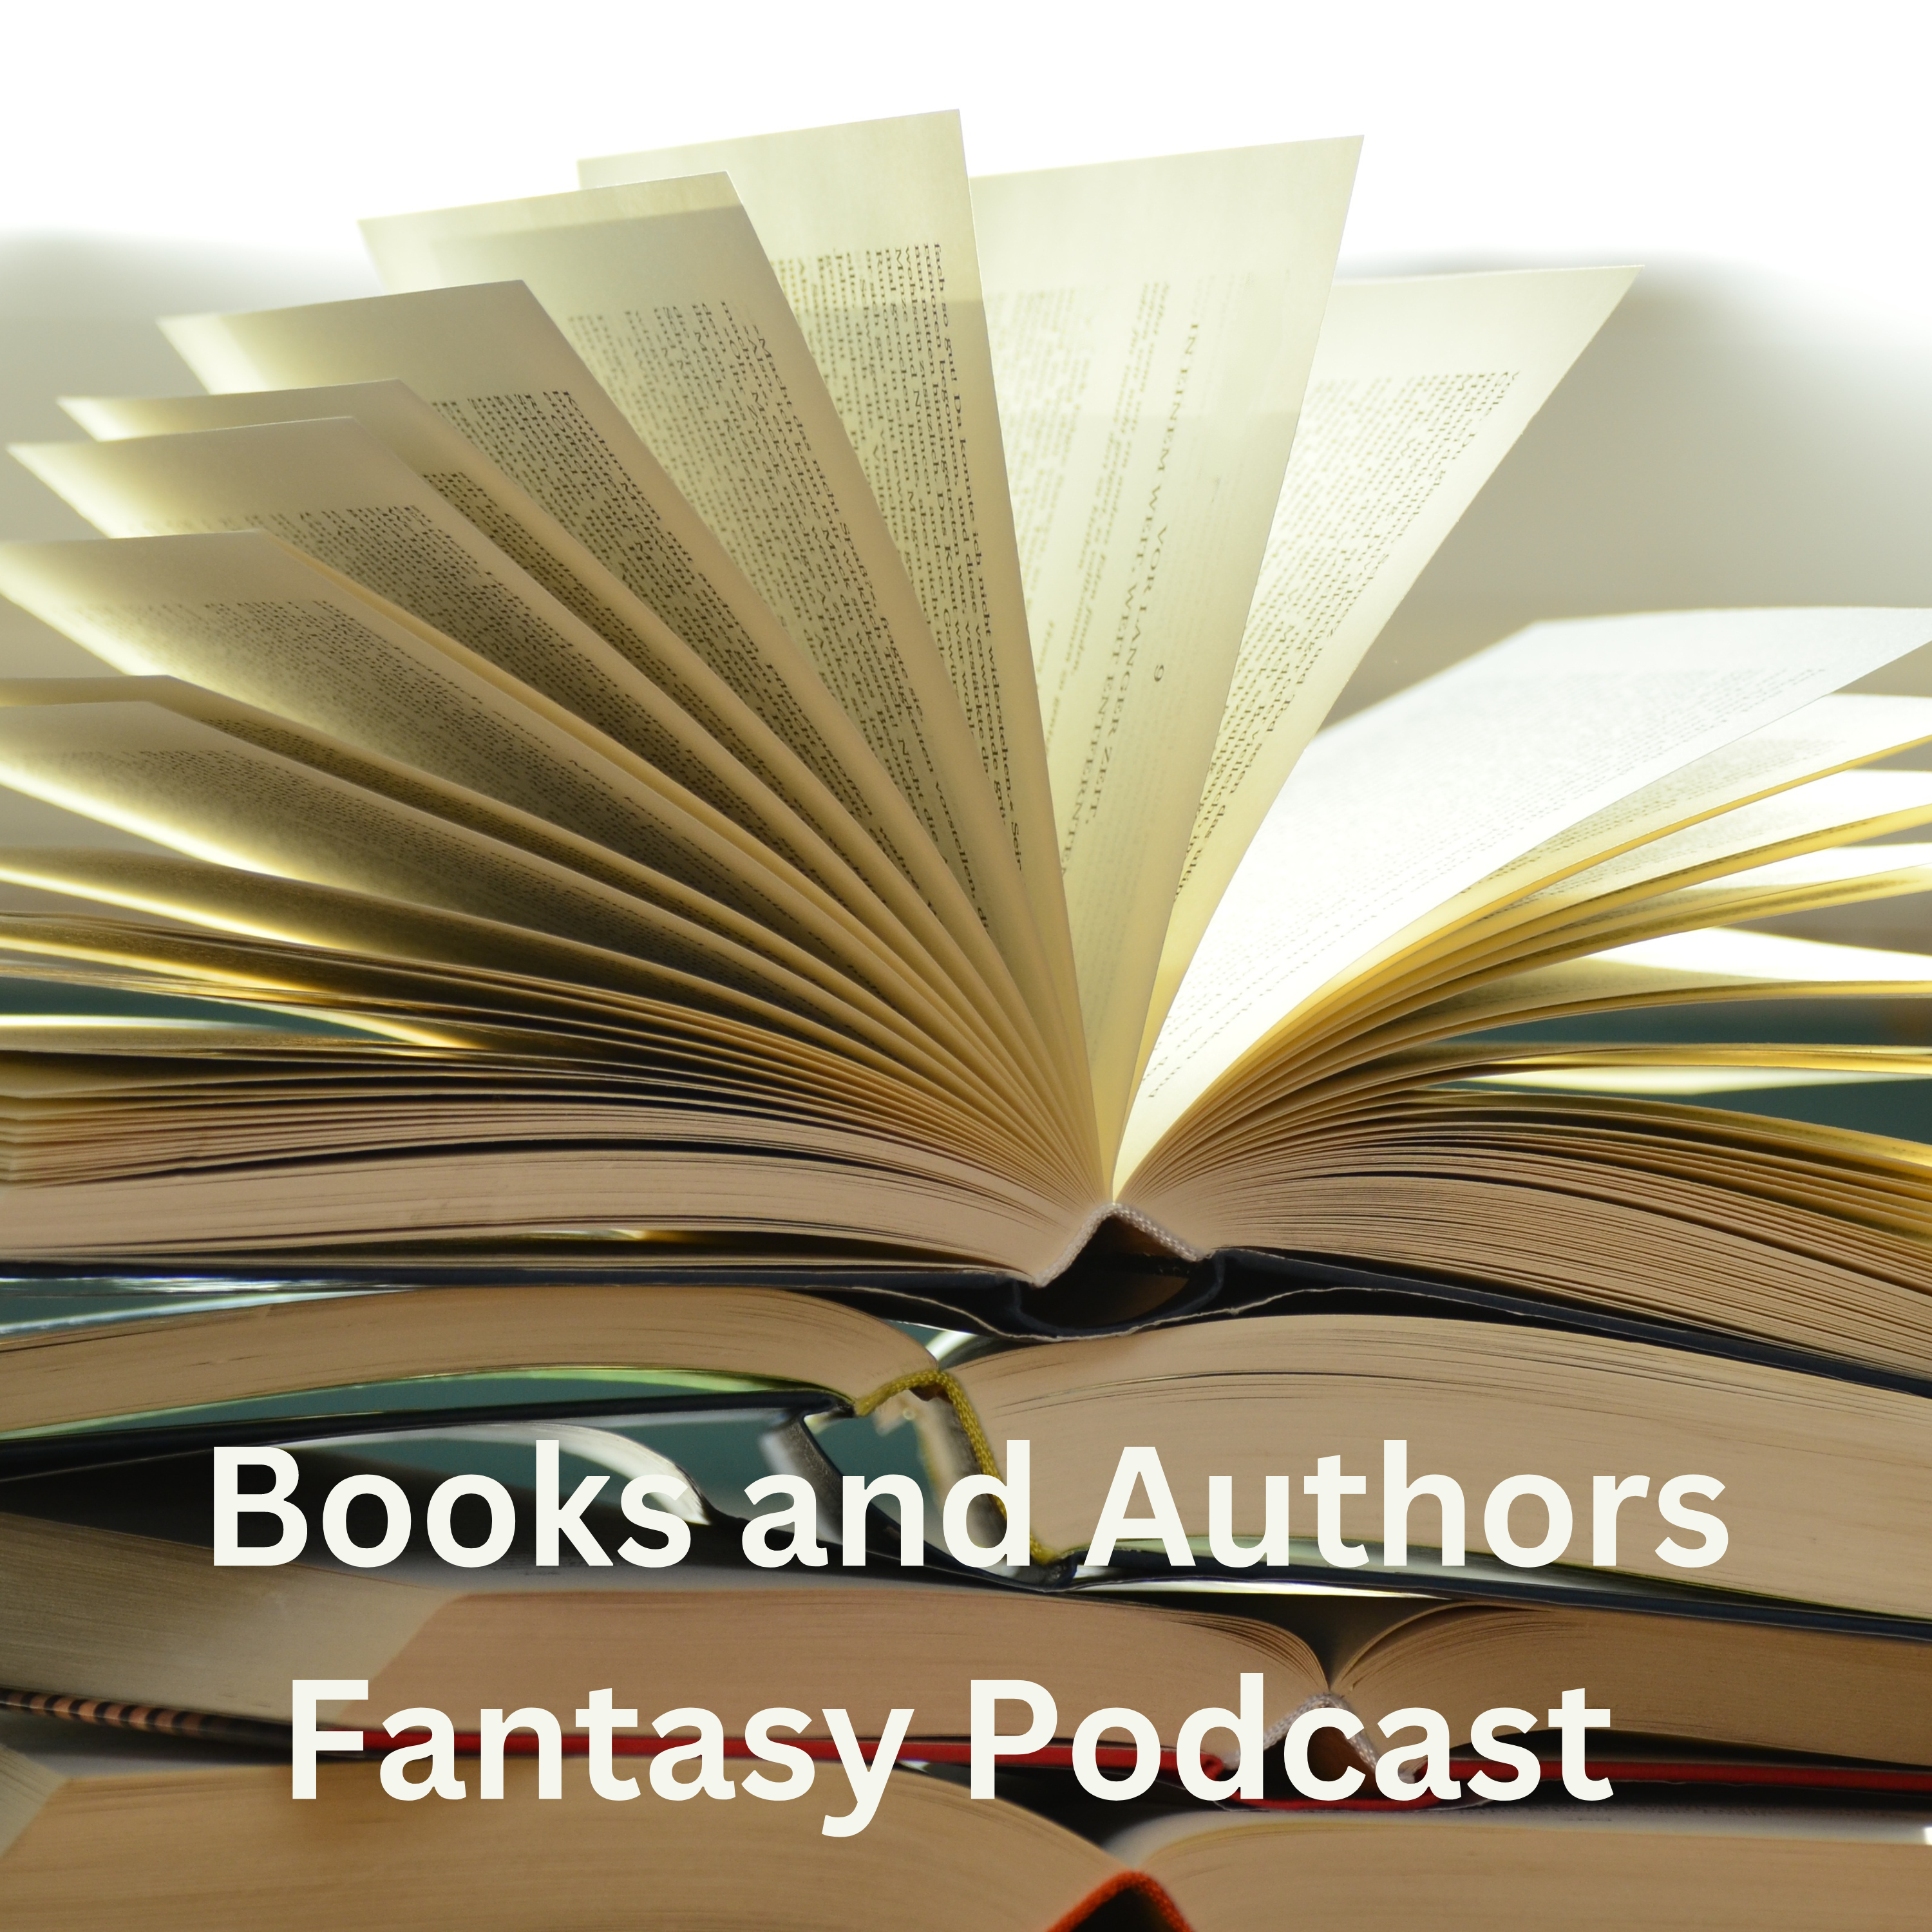 Books and Authors Fantasy Podcast